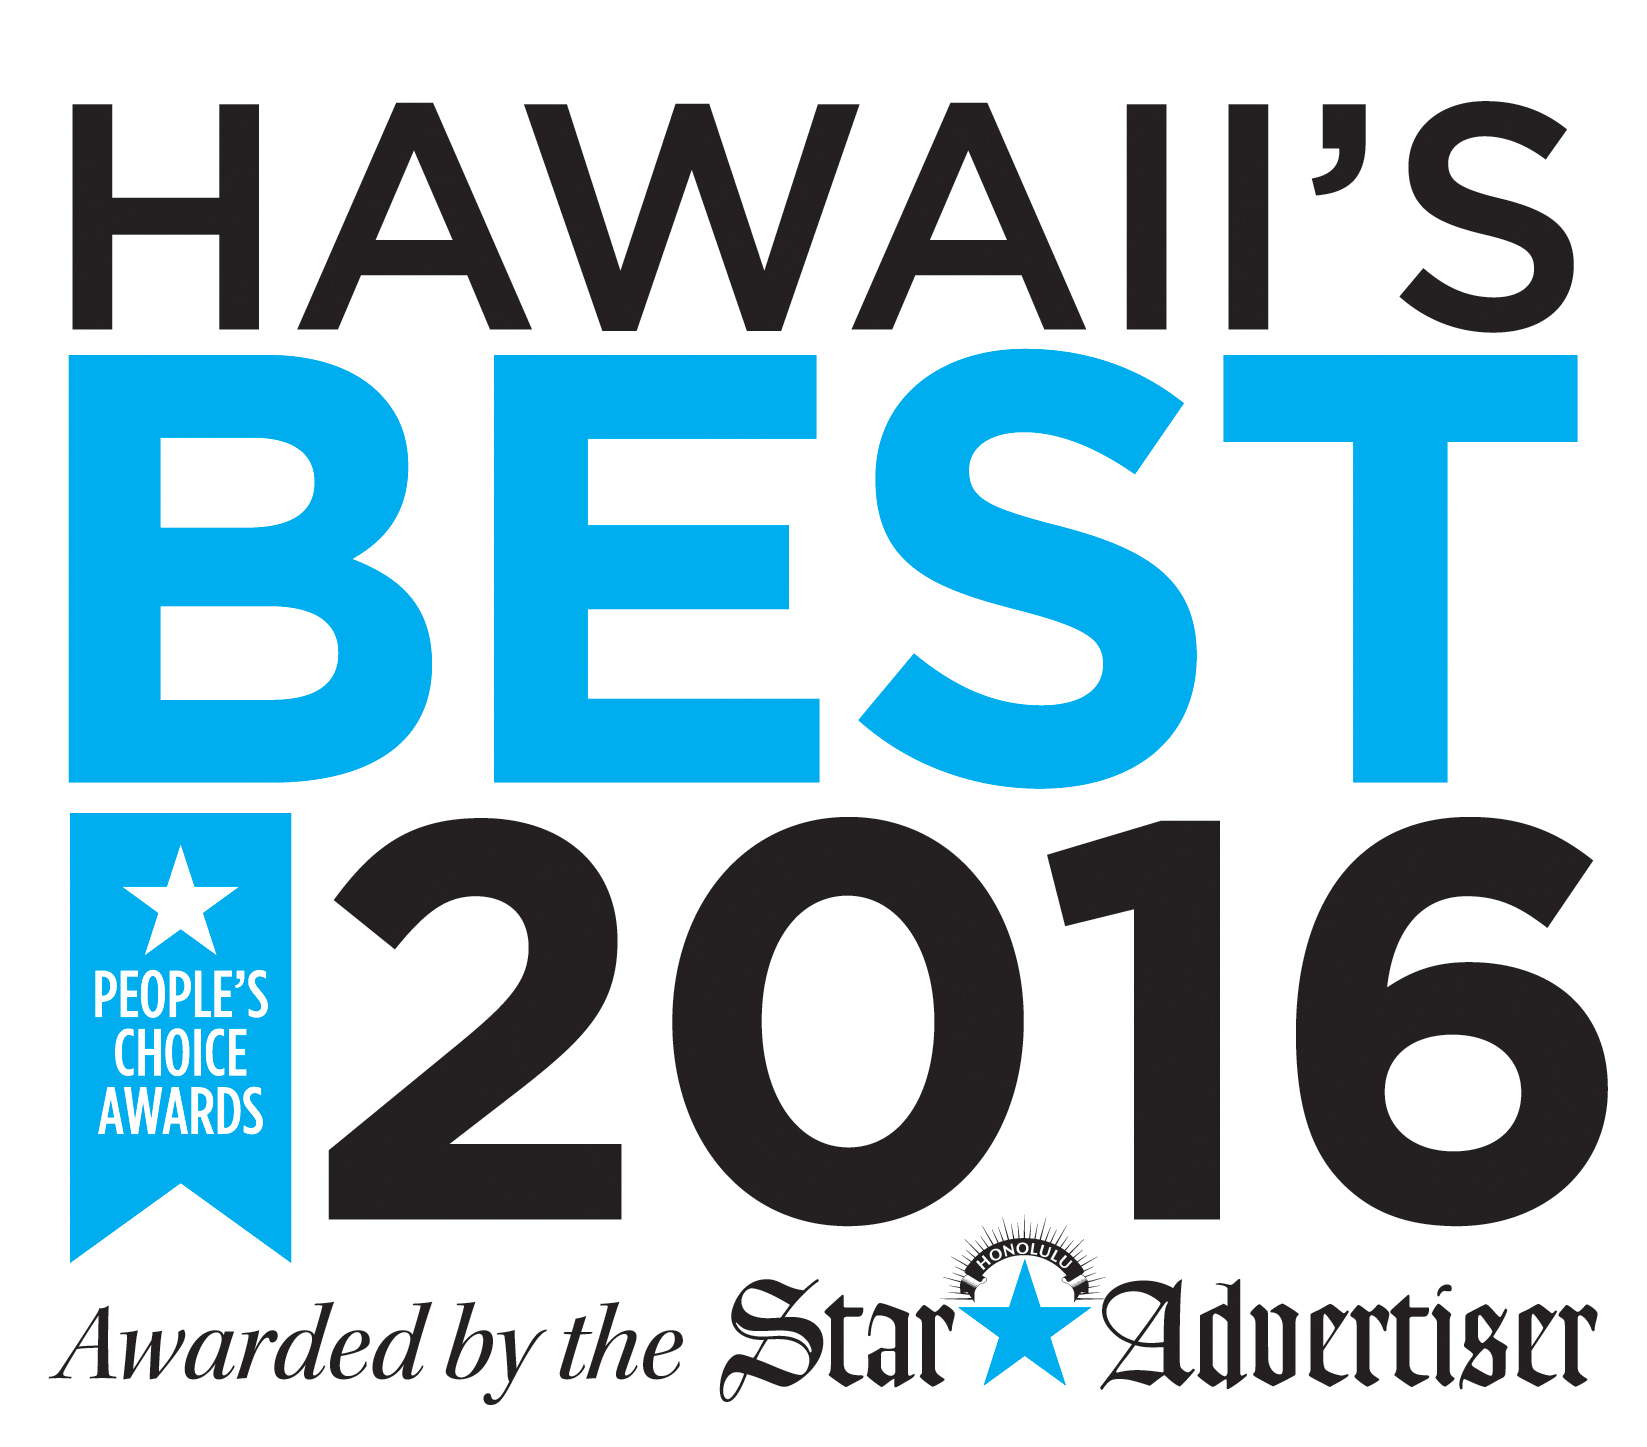 Advantage Realty Voted Hawaii's Best 2016